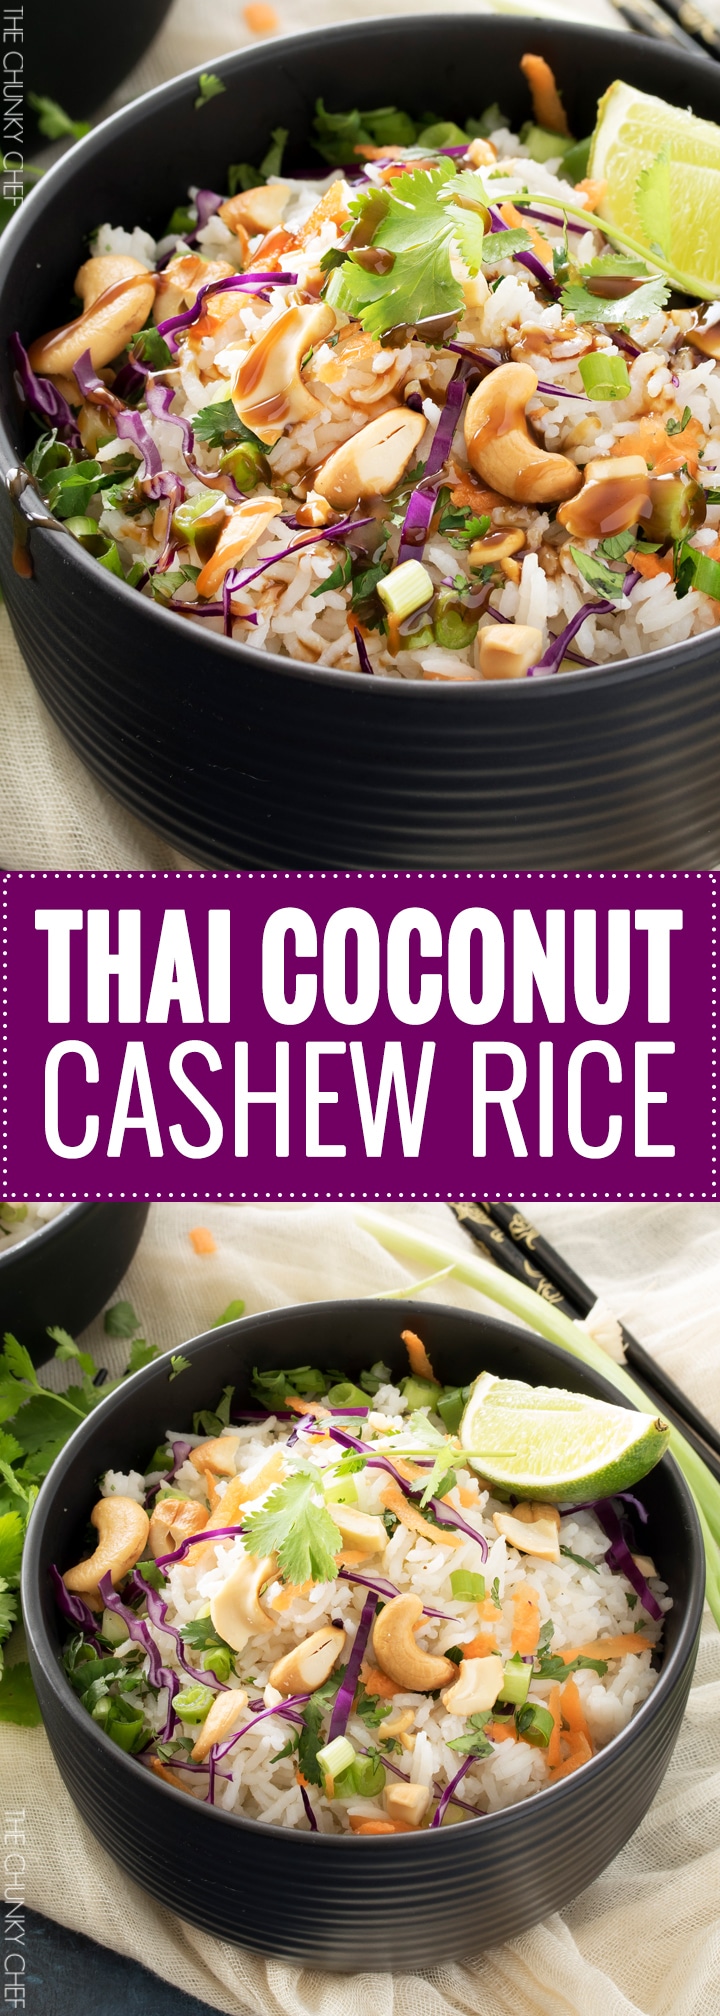 Thai Coconut Cashew Rice | This unique rice side dish is packed with Thai flavors and is a mouthwatering side dish to accompany just about any protein you'd like! | http://thechunkychef.com